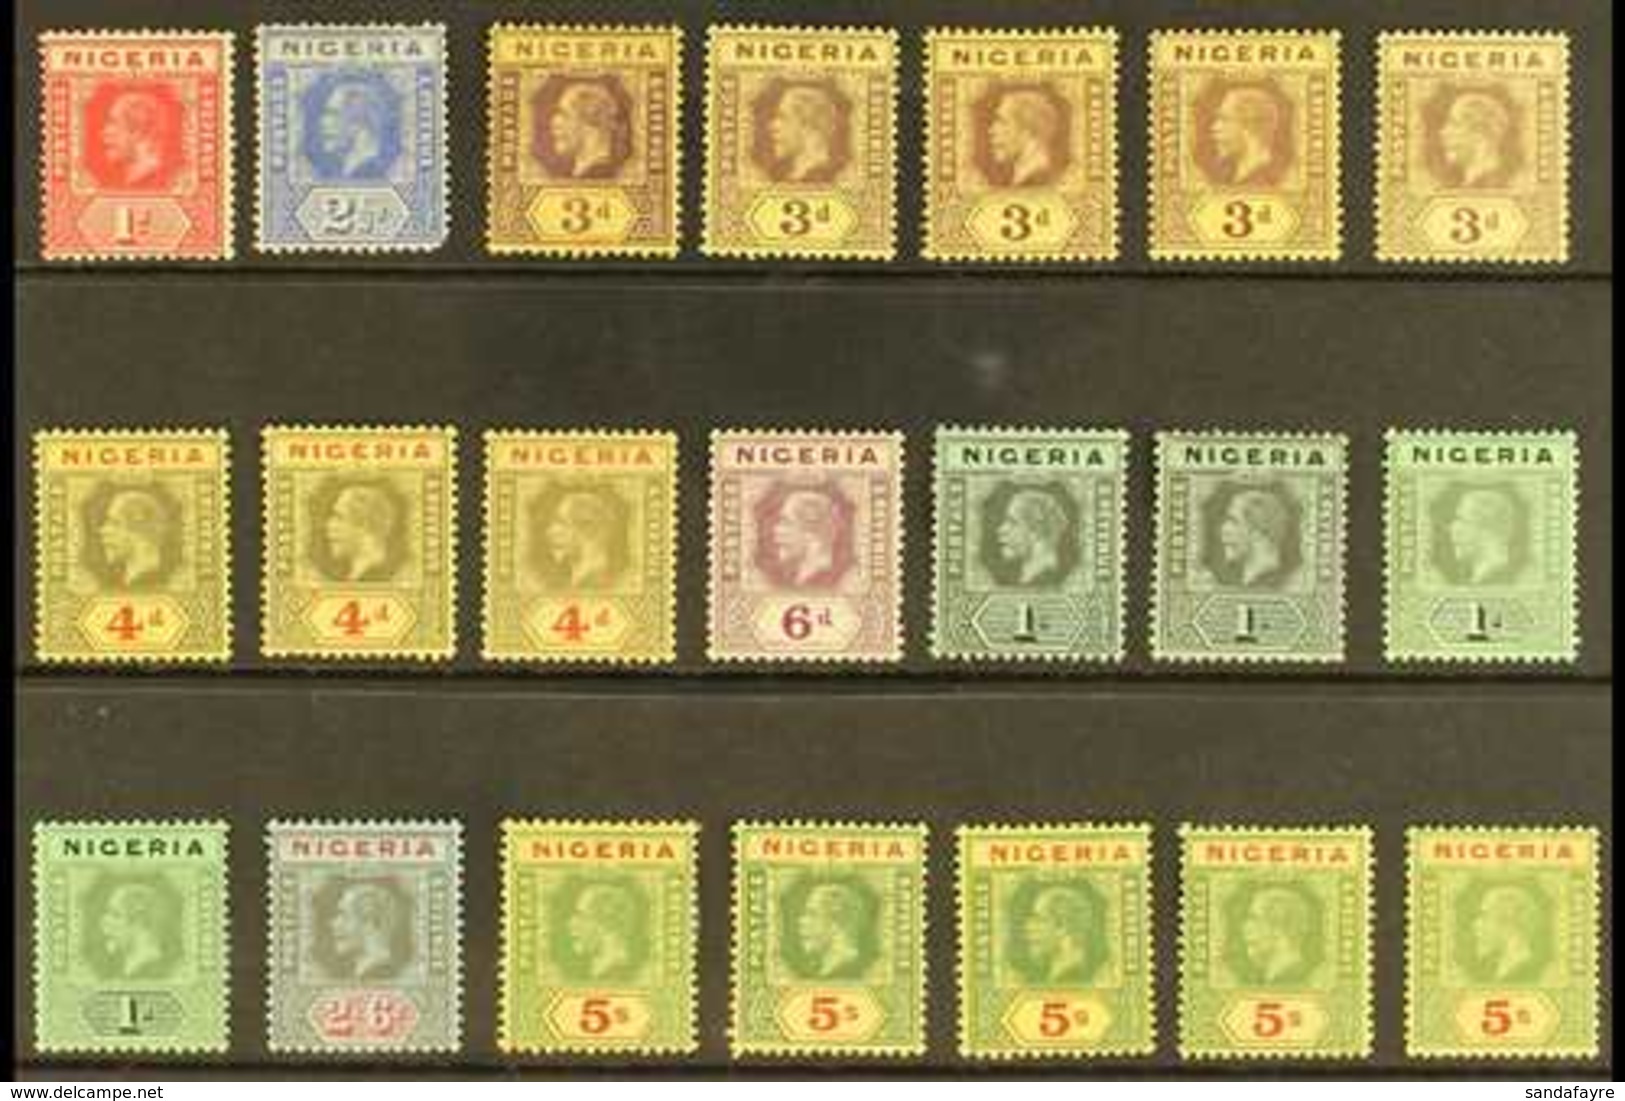 1914-29 King George V Definitives, Watermark Multi Crown CA, All Different Fine Mint Range With Most Values From 1d To 5 - Nigeria (...-1960)